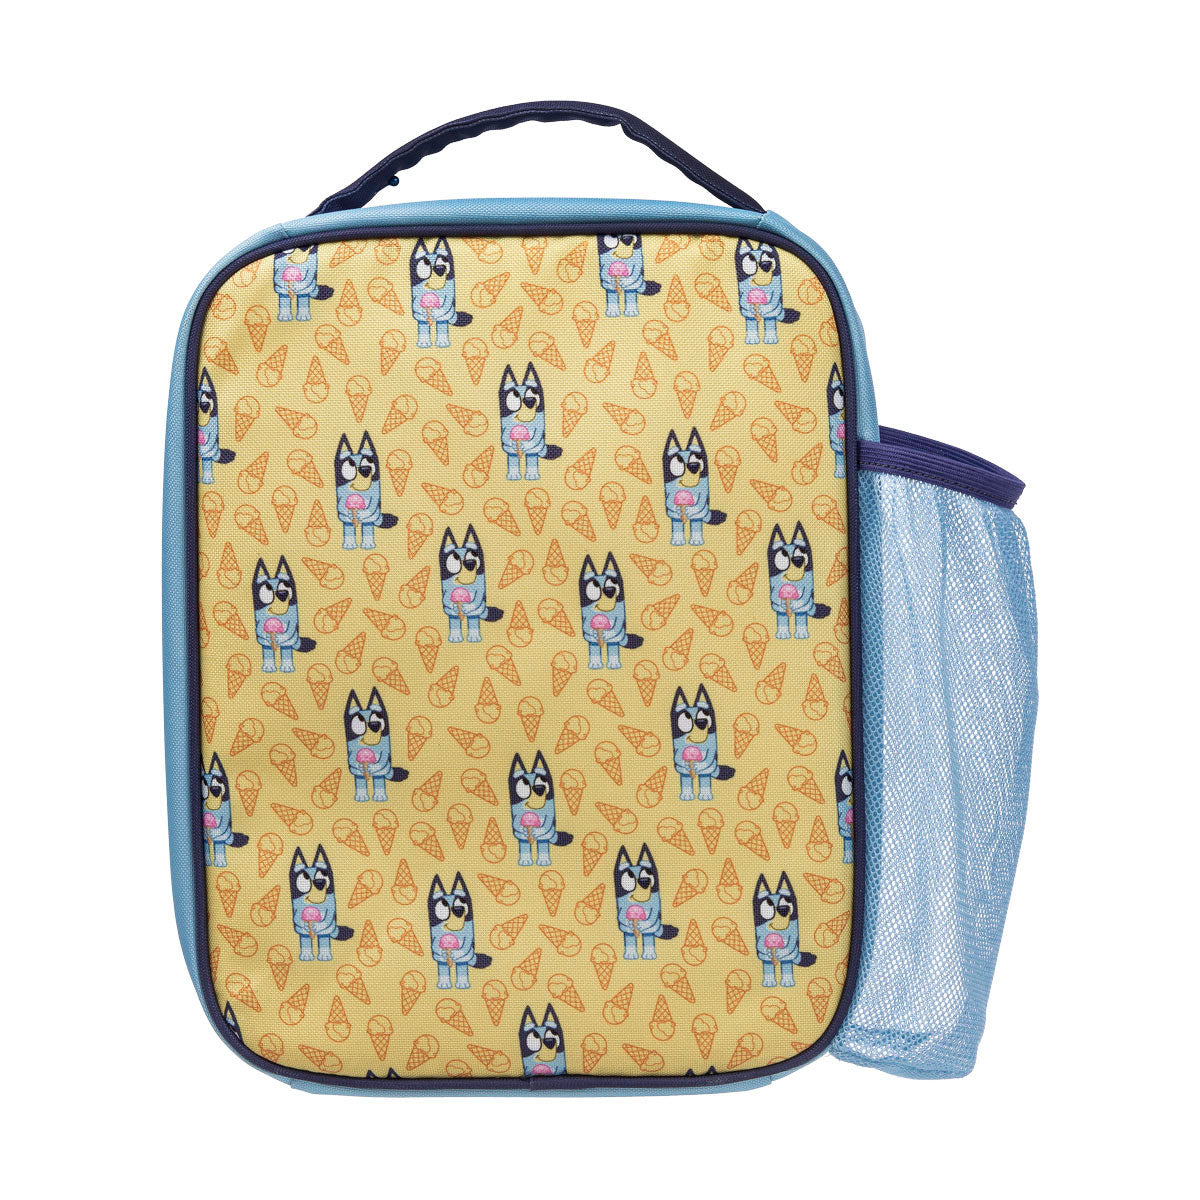 Bluey insulated lunch bag